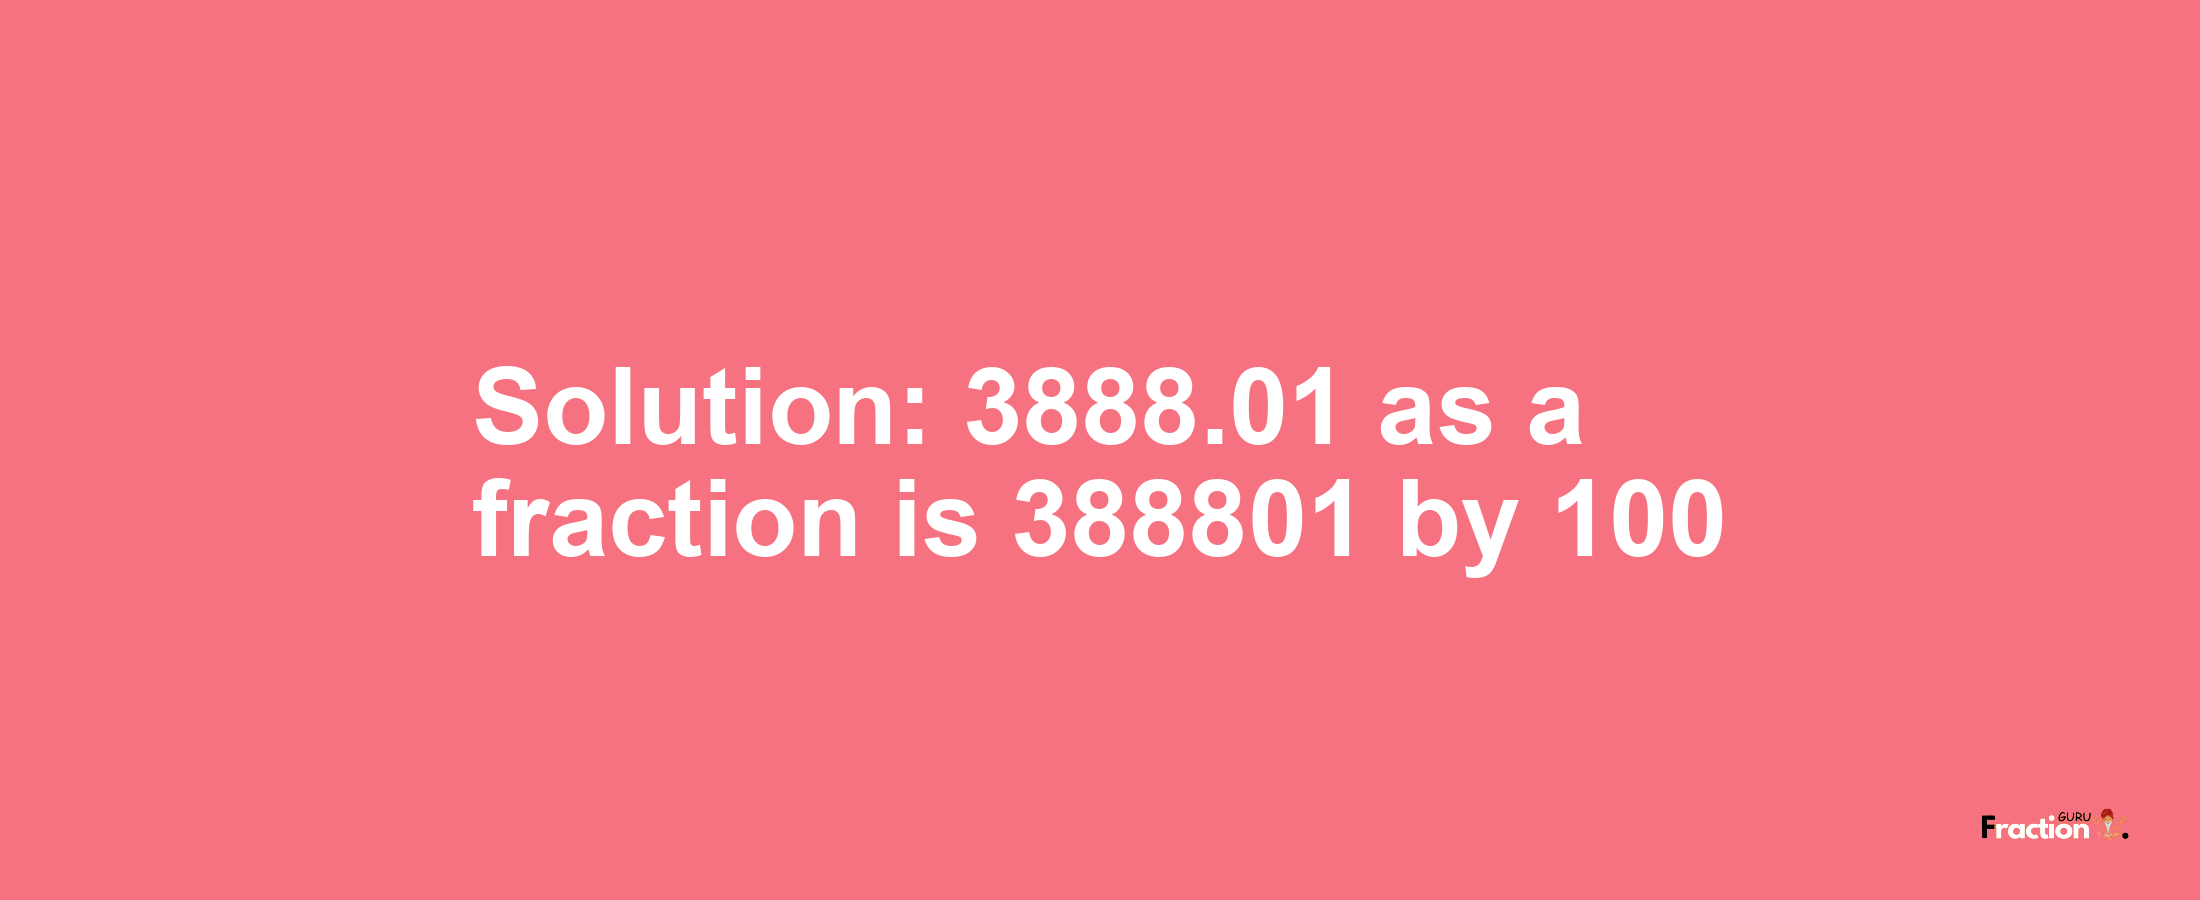 Solution:3888.01 as a fraction is 388801/100